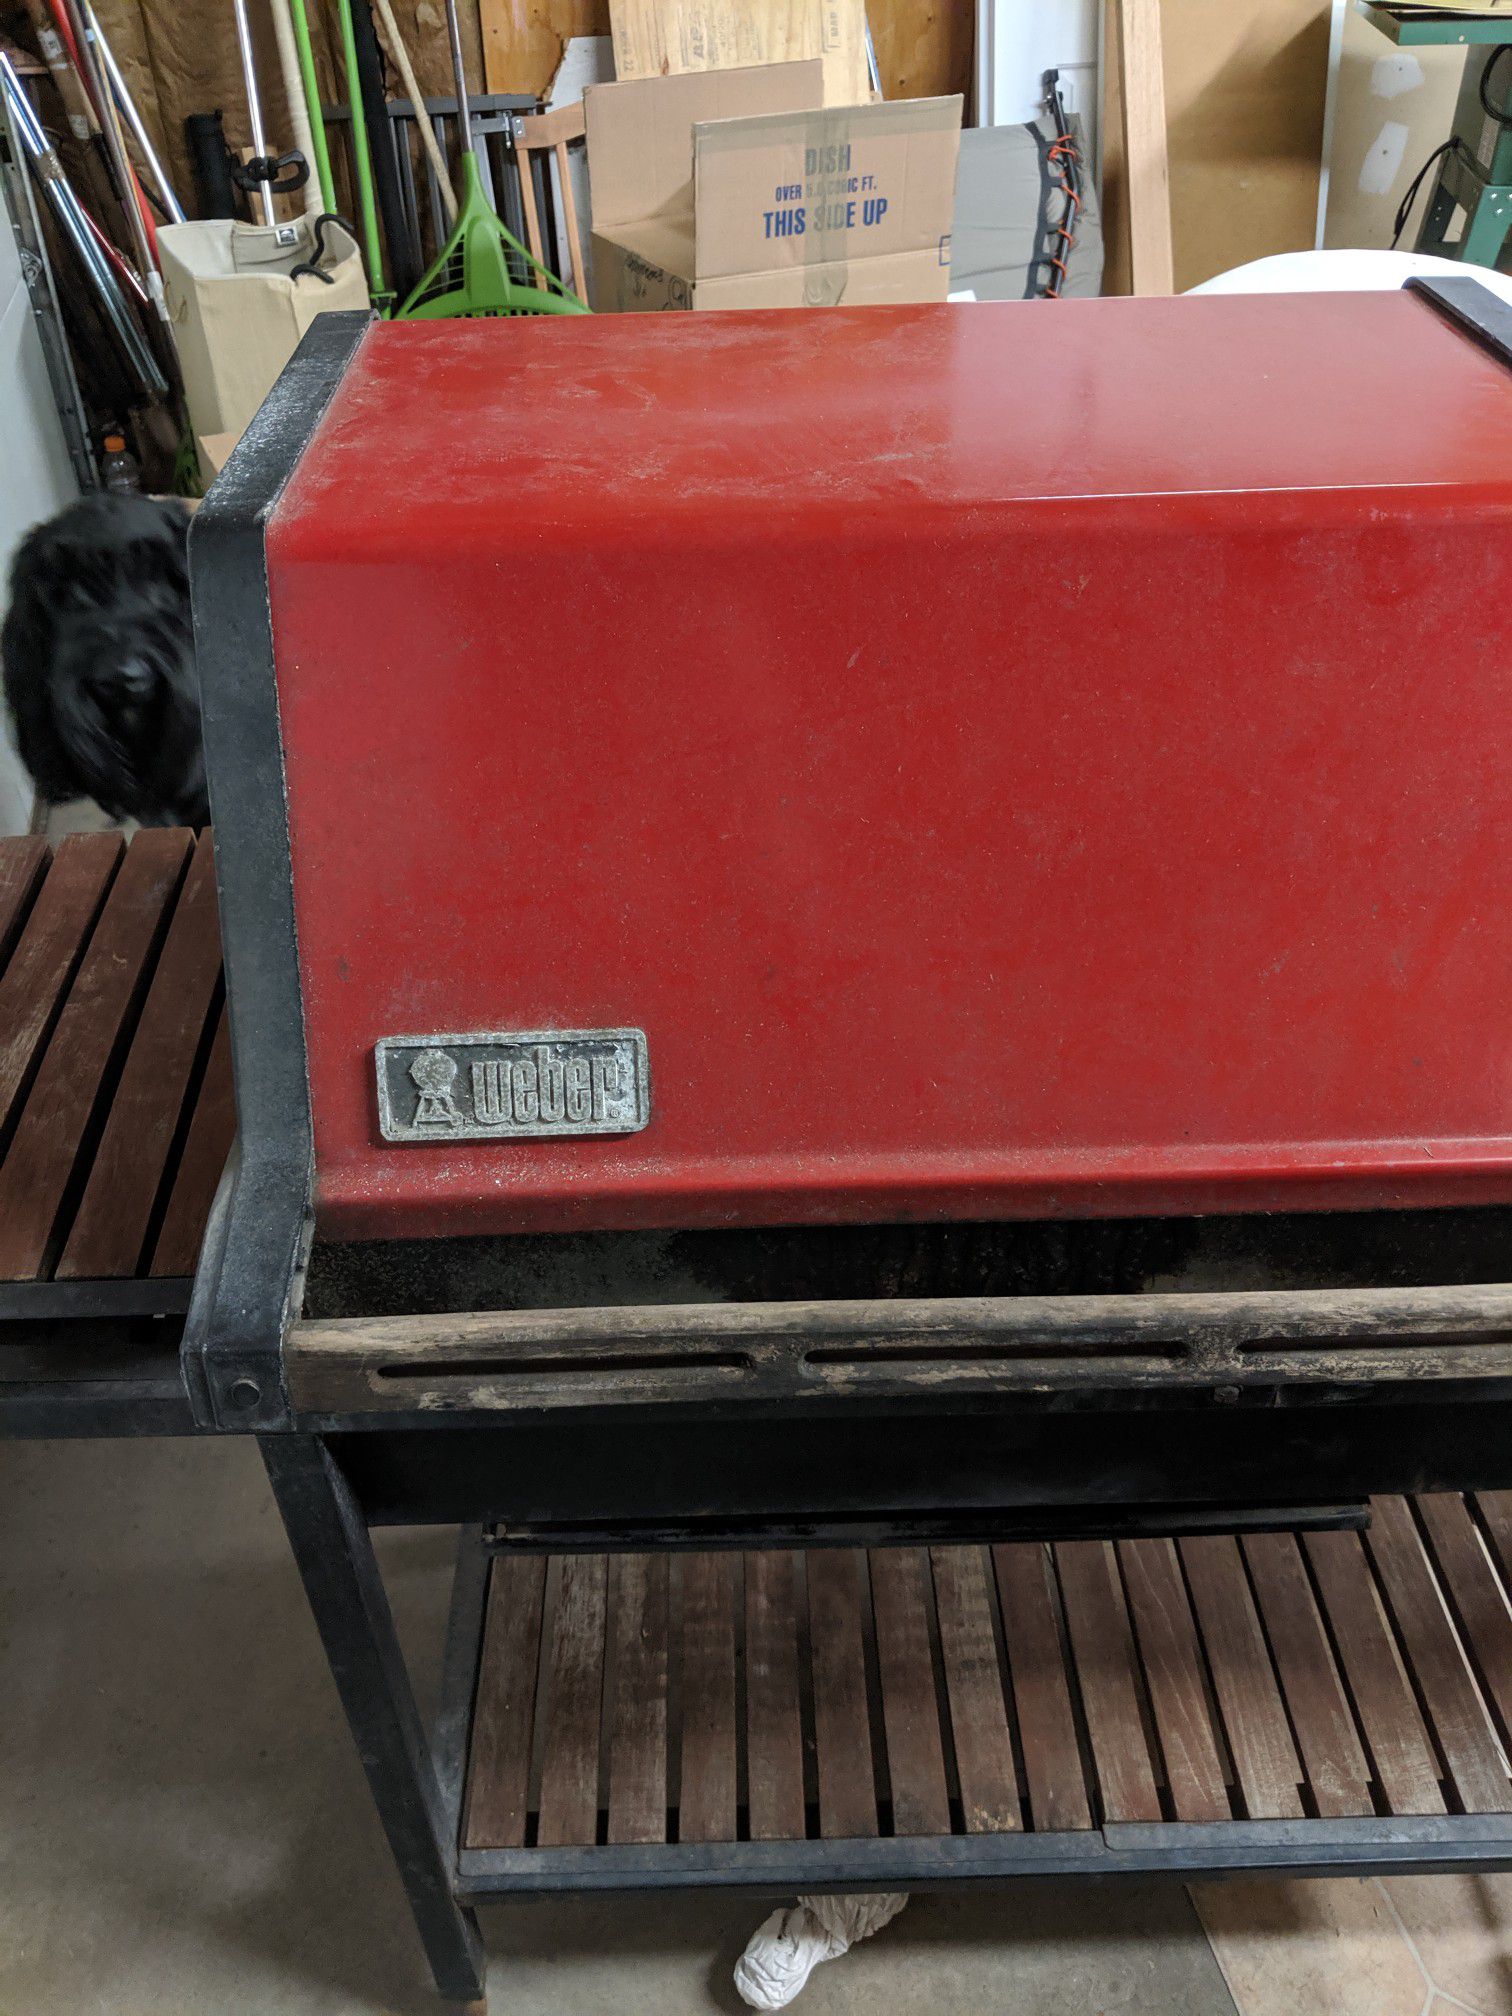 Free - Weber 1000 grill